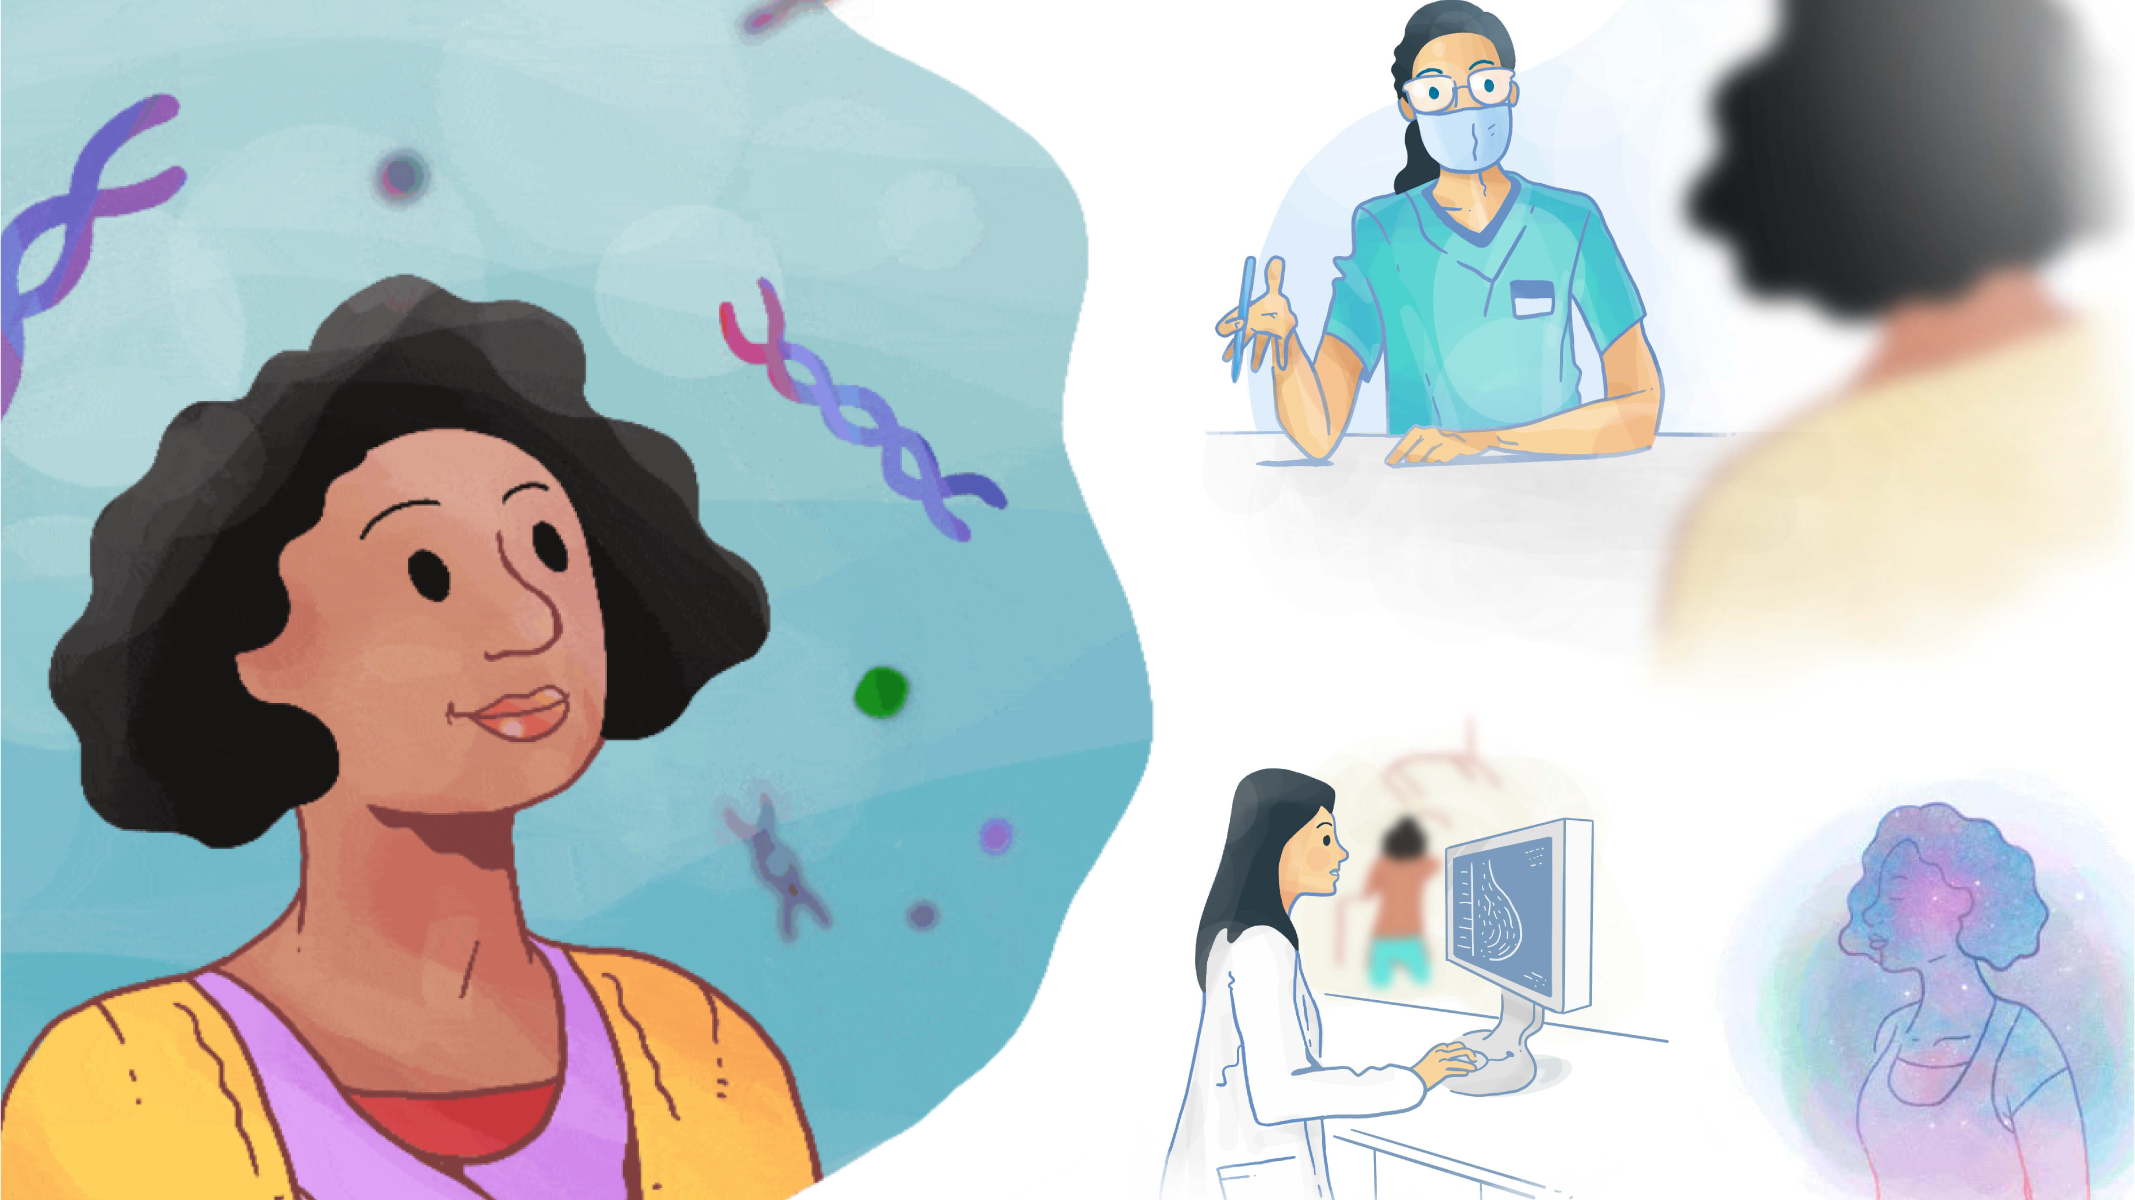 Cartoon of a person looking up at DNA floating in the air. There are two smaller cartoons with healthcare professionals in the image.  